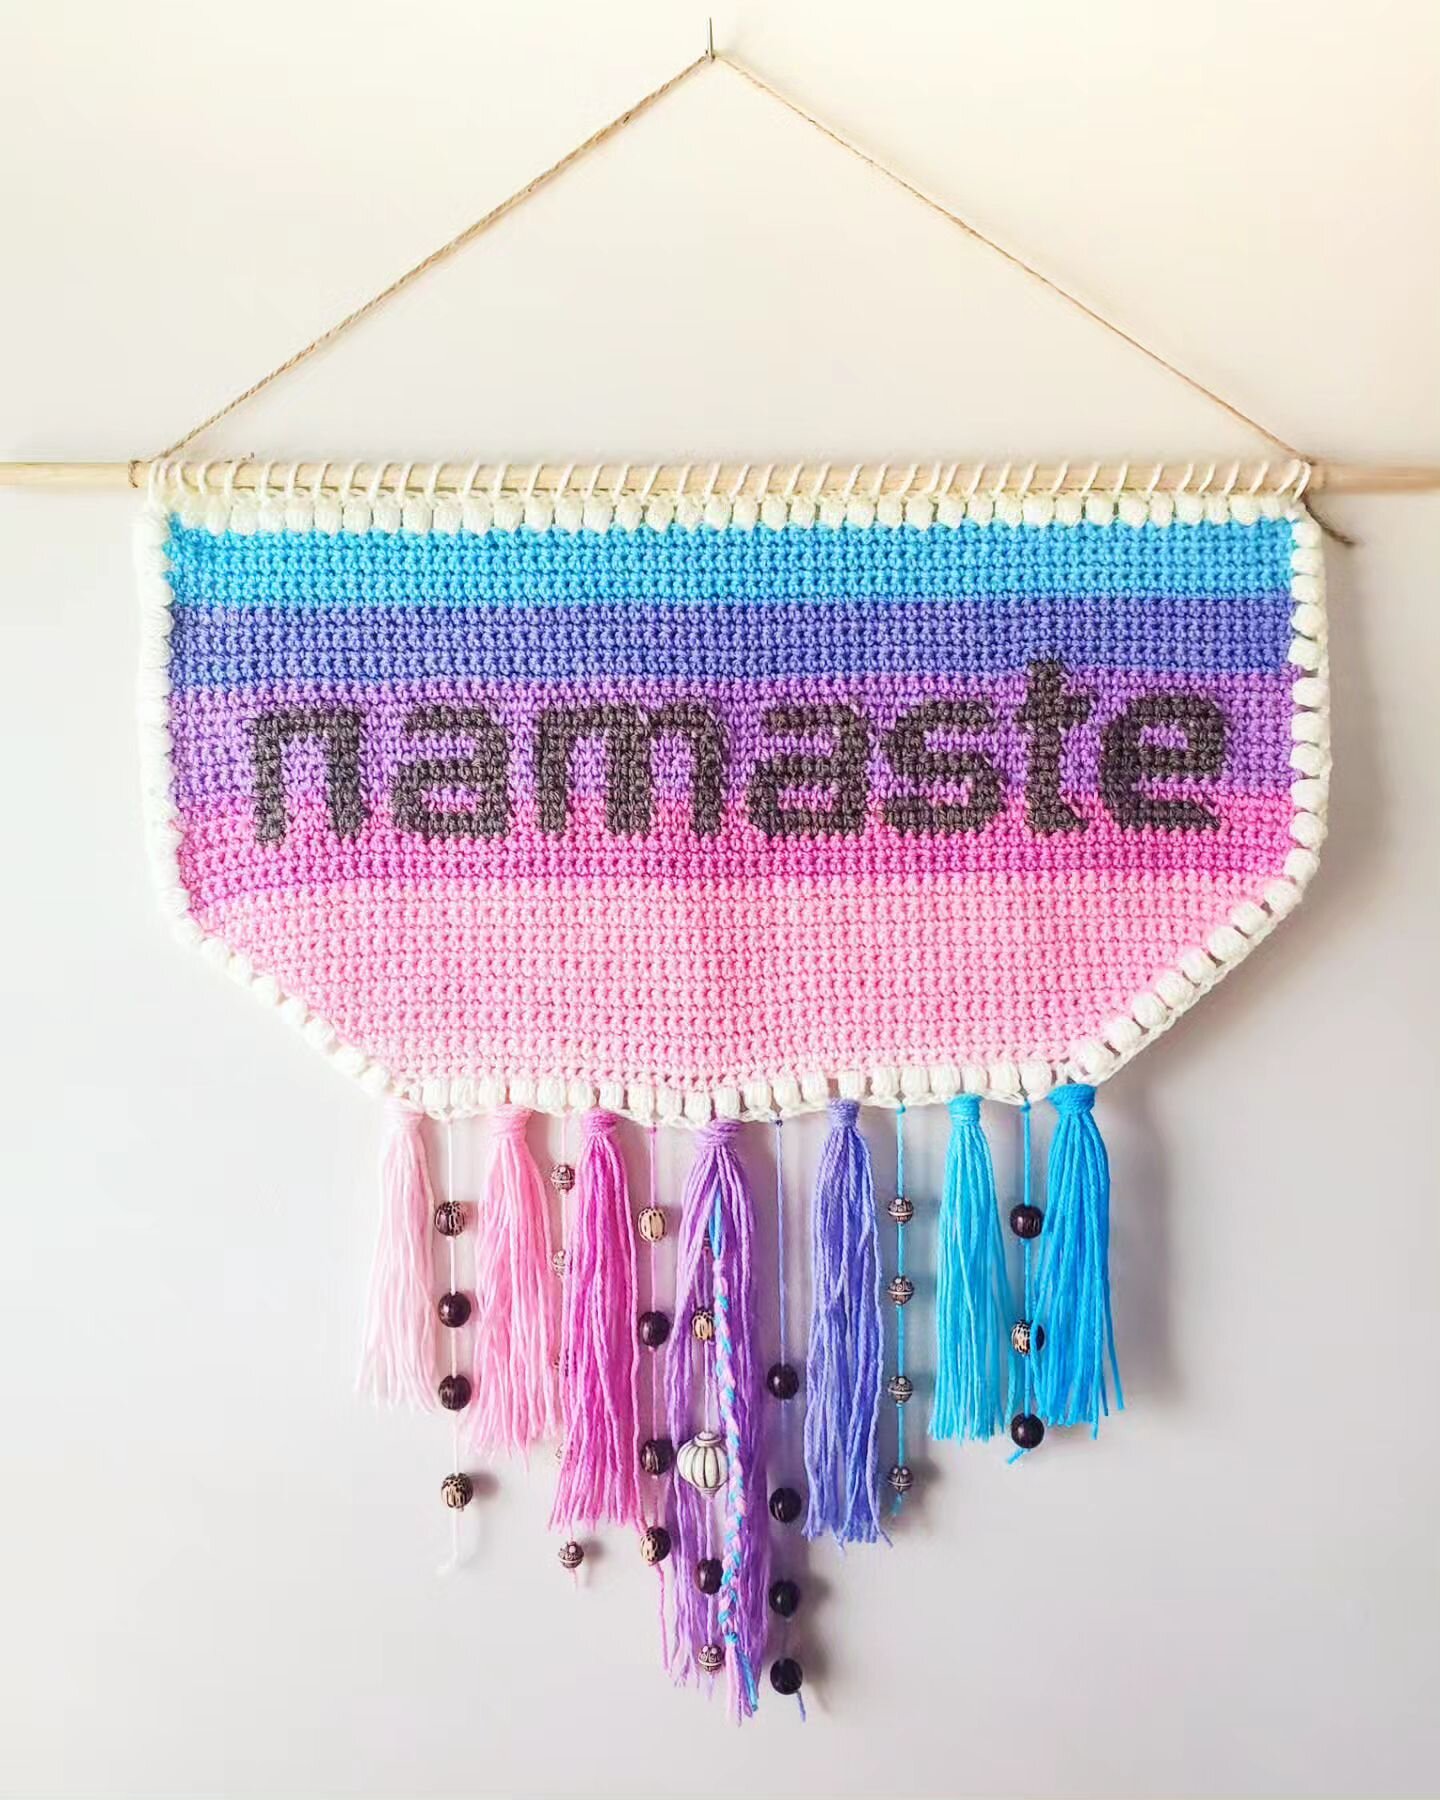 Freebie Friday 🩷
Head on over to the blog as there is a new pattern for freeeeeee. The Namaste Wall Hanging in honor of me getting back to making another wall hanging. I can't wait for you to see the new wall hanging as well. 
Link to blog in bio. 
